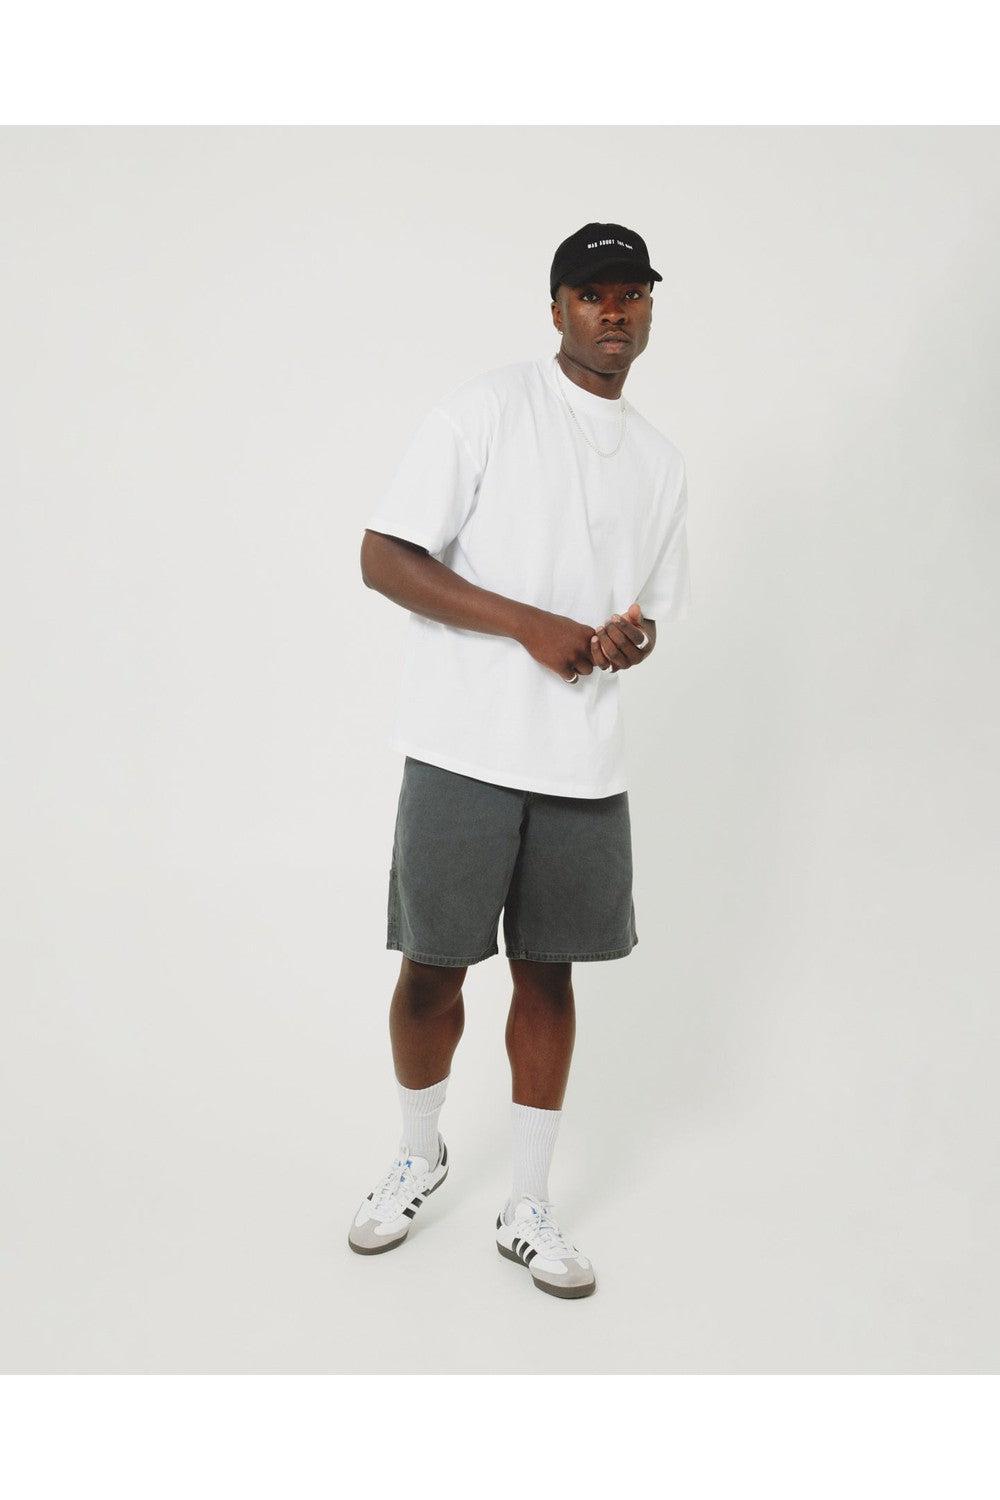 Commoners Mens Oversized Tee - White | COMMONERS | Mad About The Boy